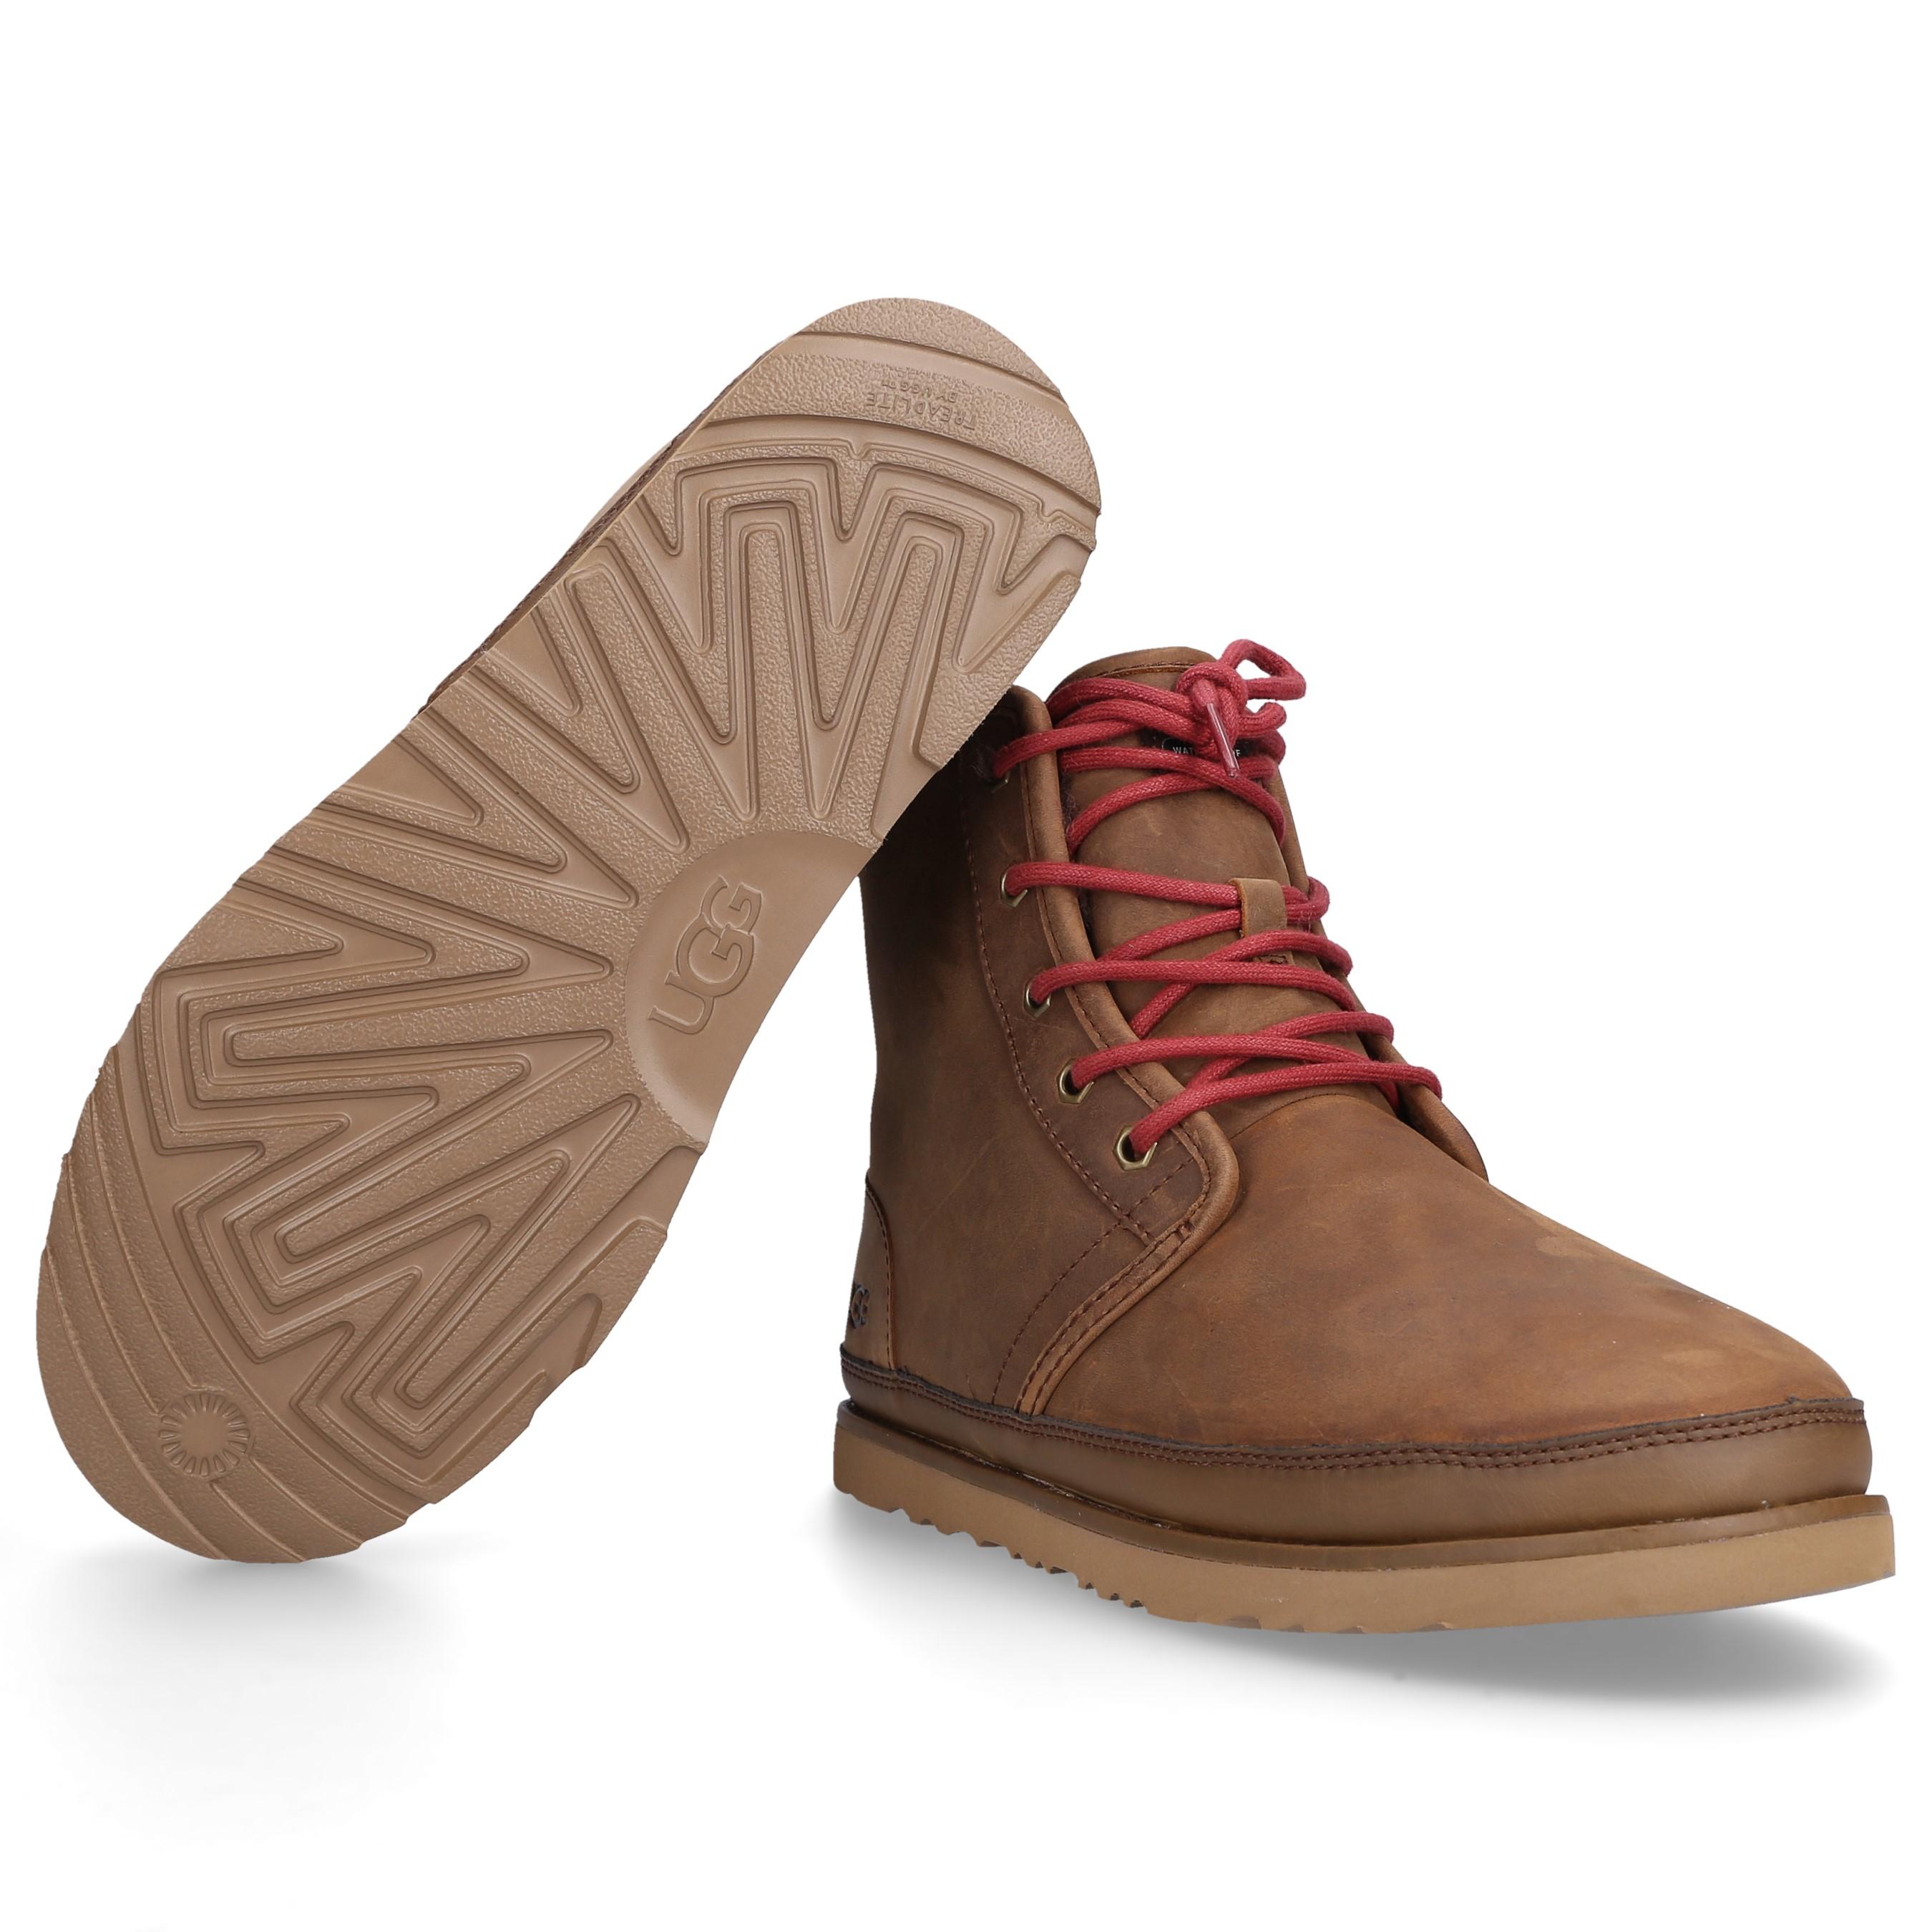 UGG Leather Harkley Waterproof Boots in Chestnut (Brown) for Men - Save 46%  - Lyst